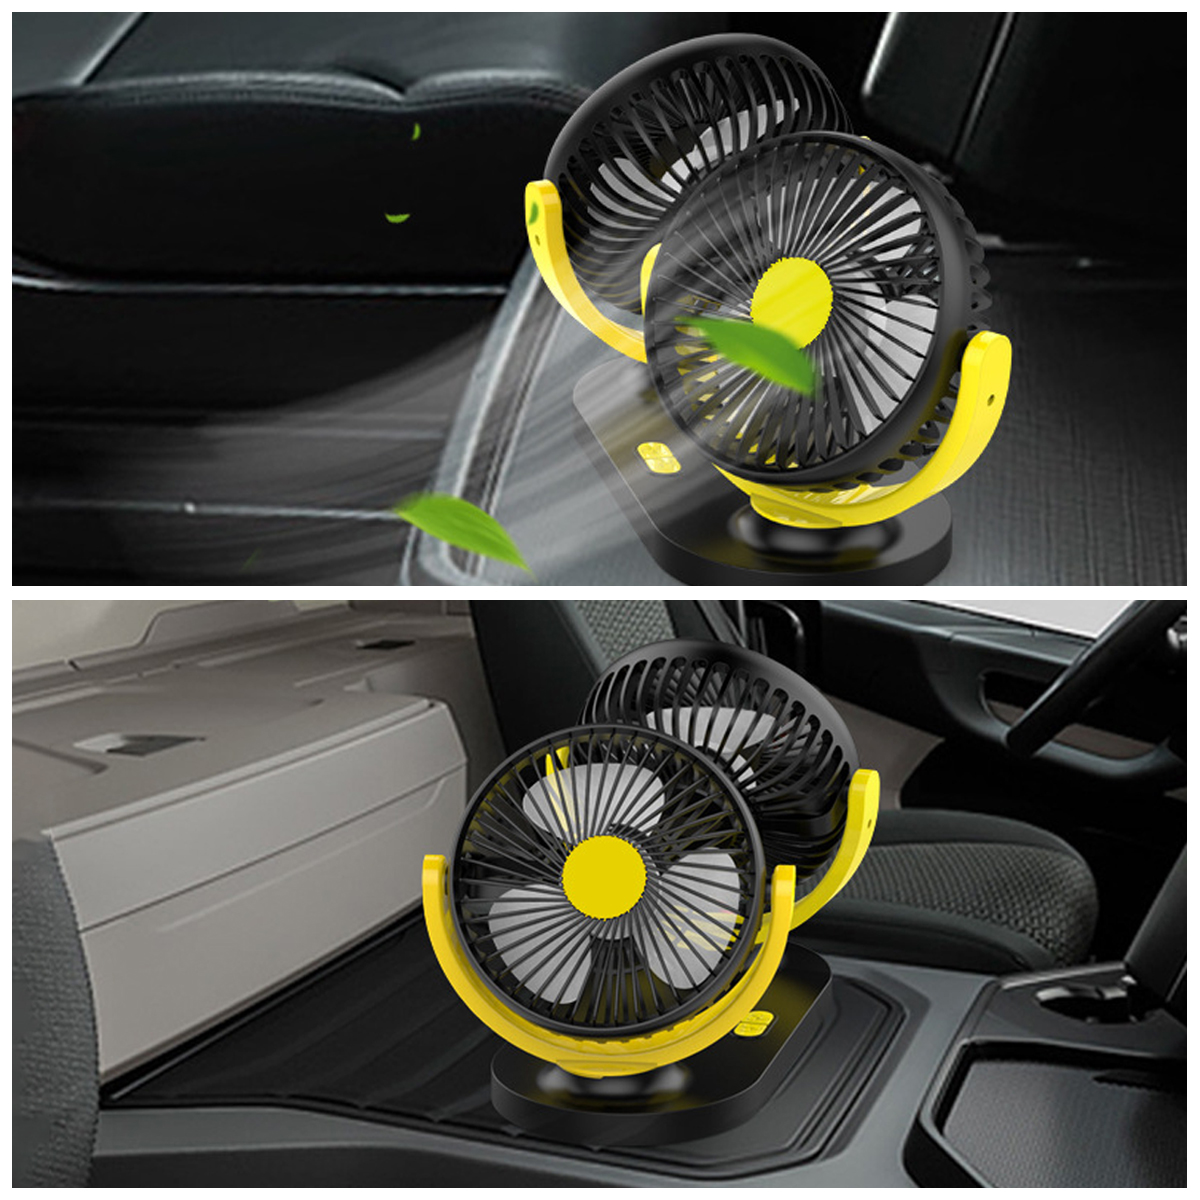 24V-Mini-Dual-Head-Fan-Car-Van-Home-Silent-Cooler-Cooling-Fan-USB-Rechargeable-Outdoor-Camping-Trave-1762386-6